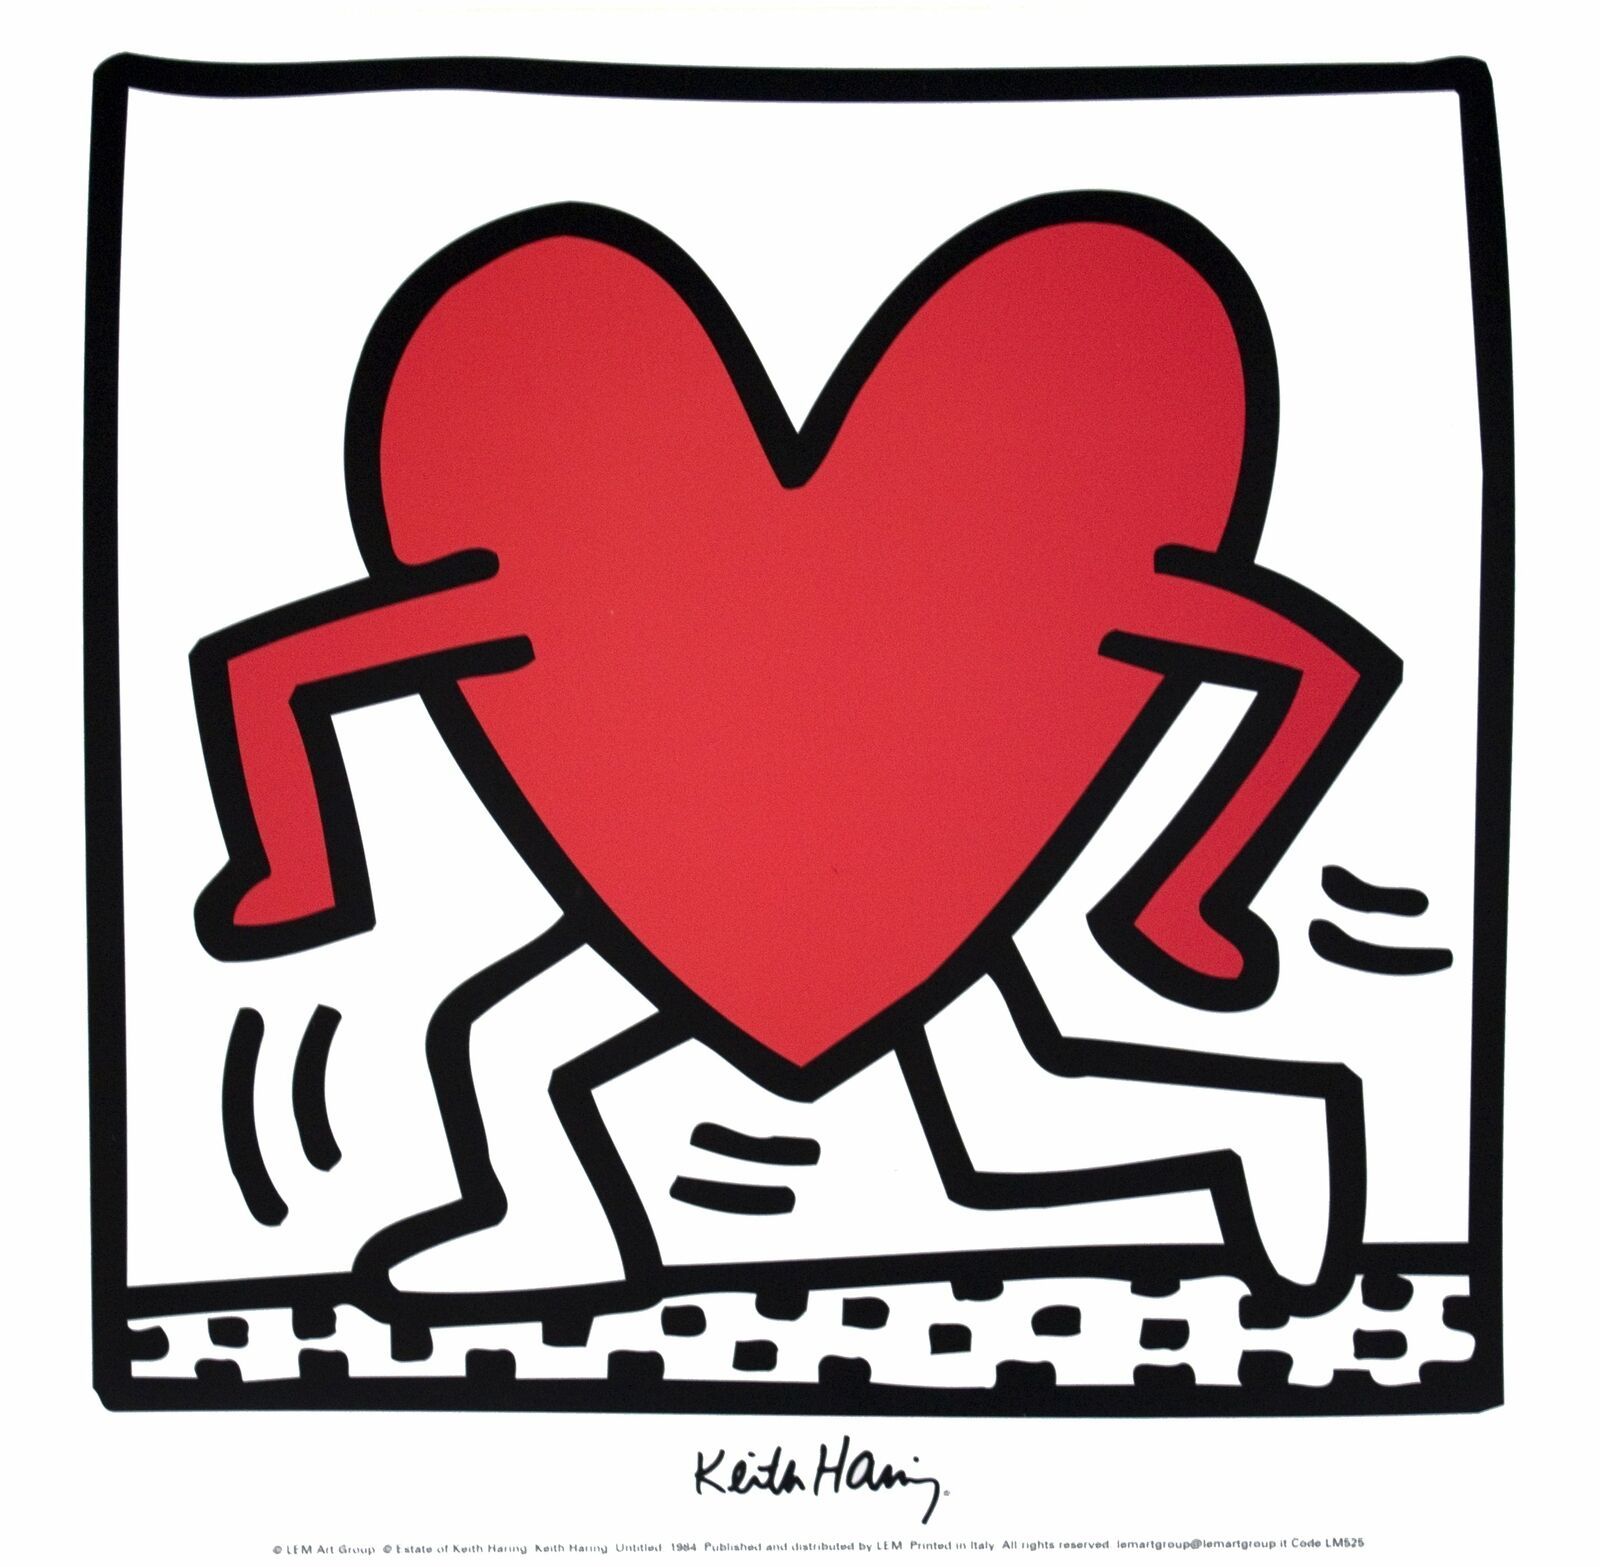 KEITH HARING Untitled (1984) 11.75 x 11.75 Poster Pop Art Black & White, Red